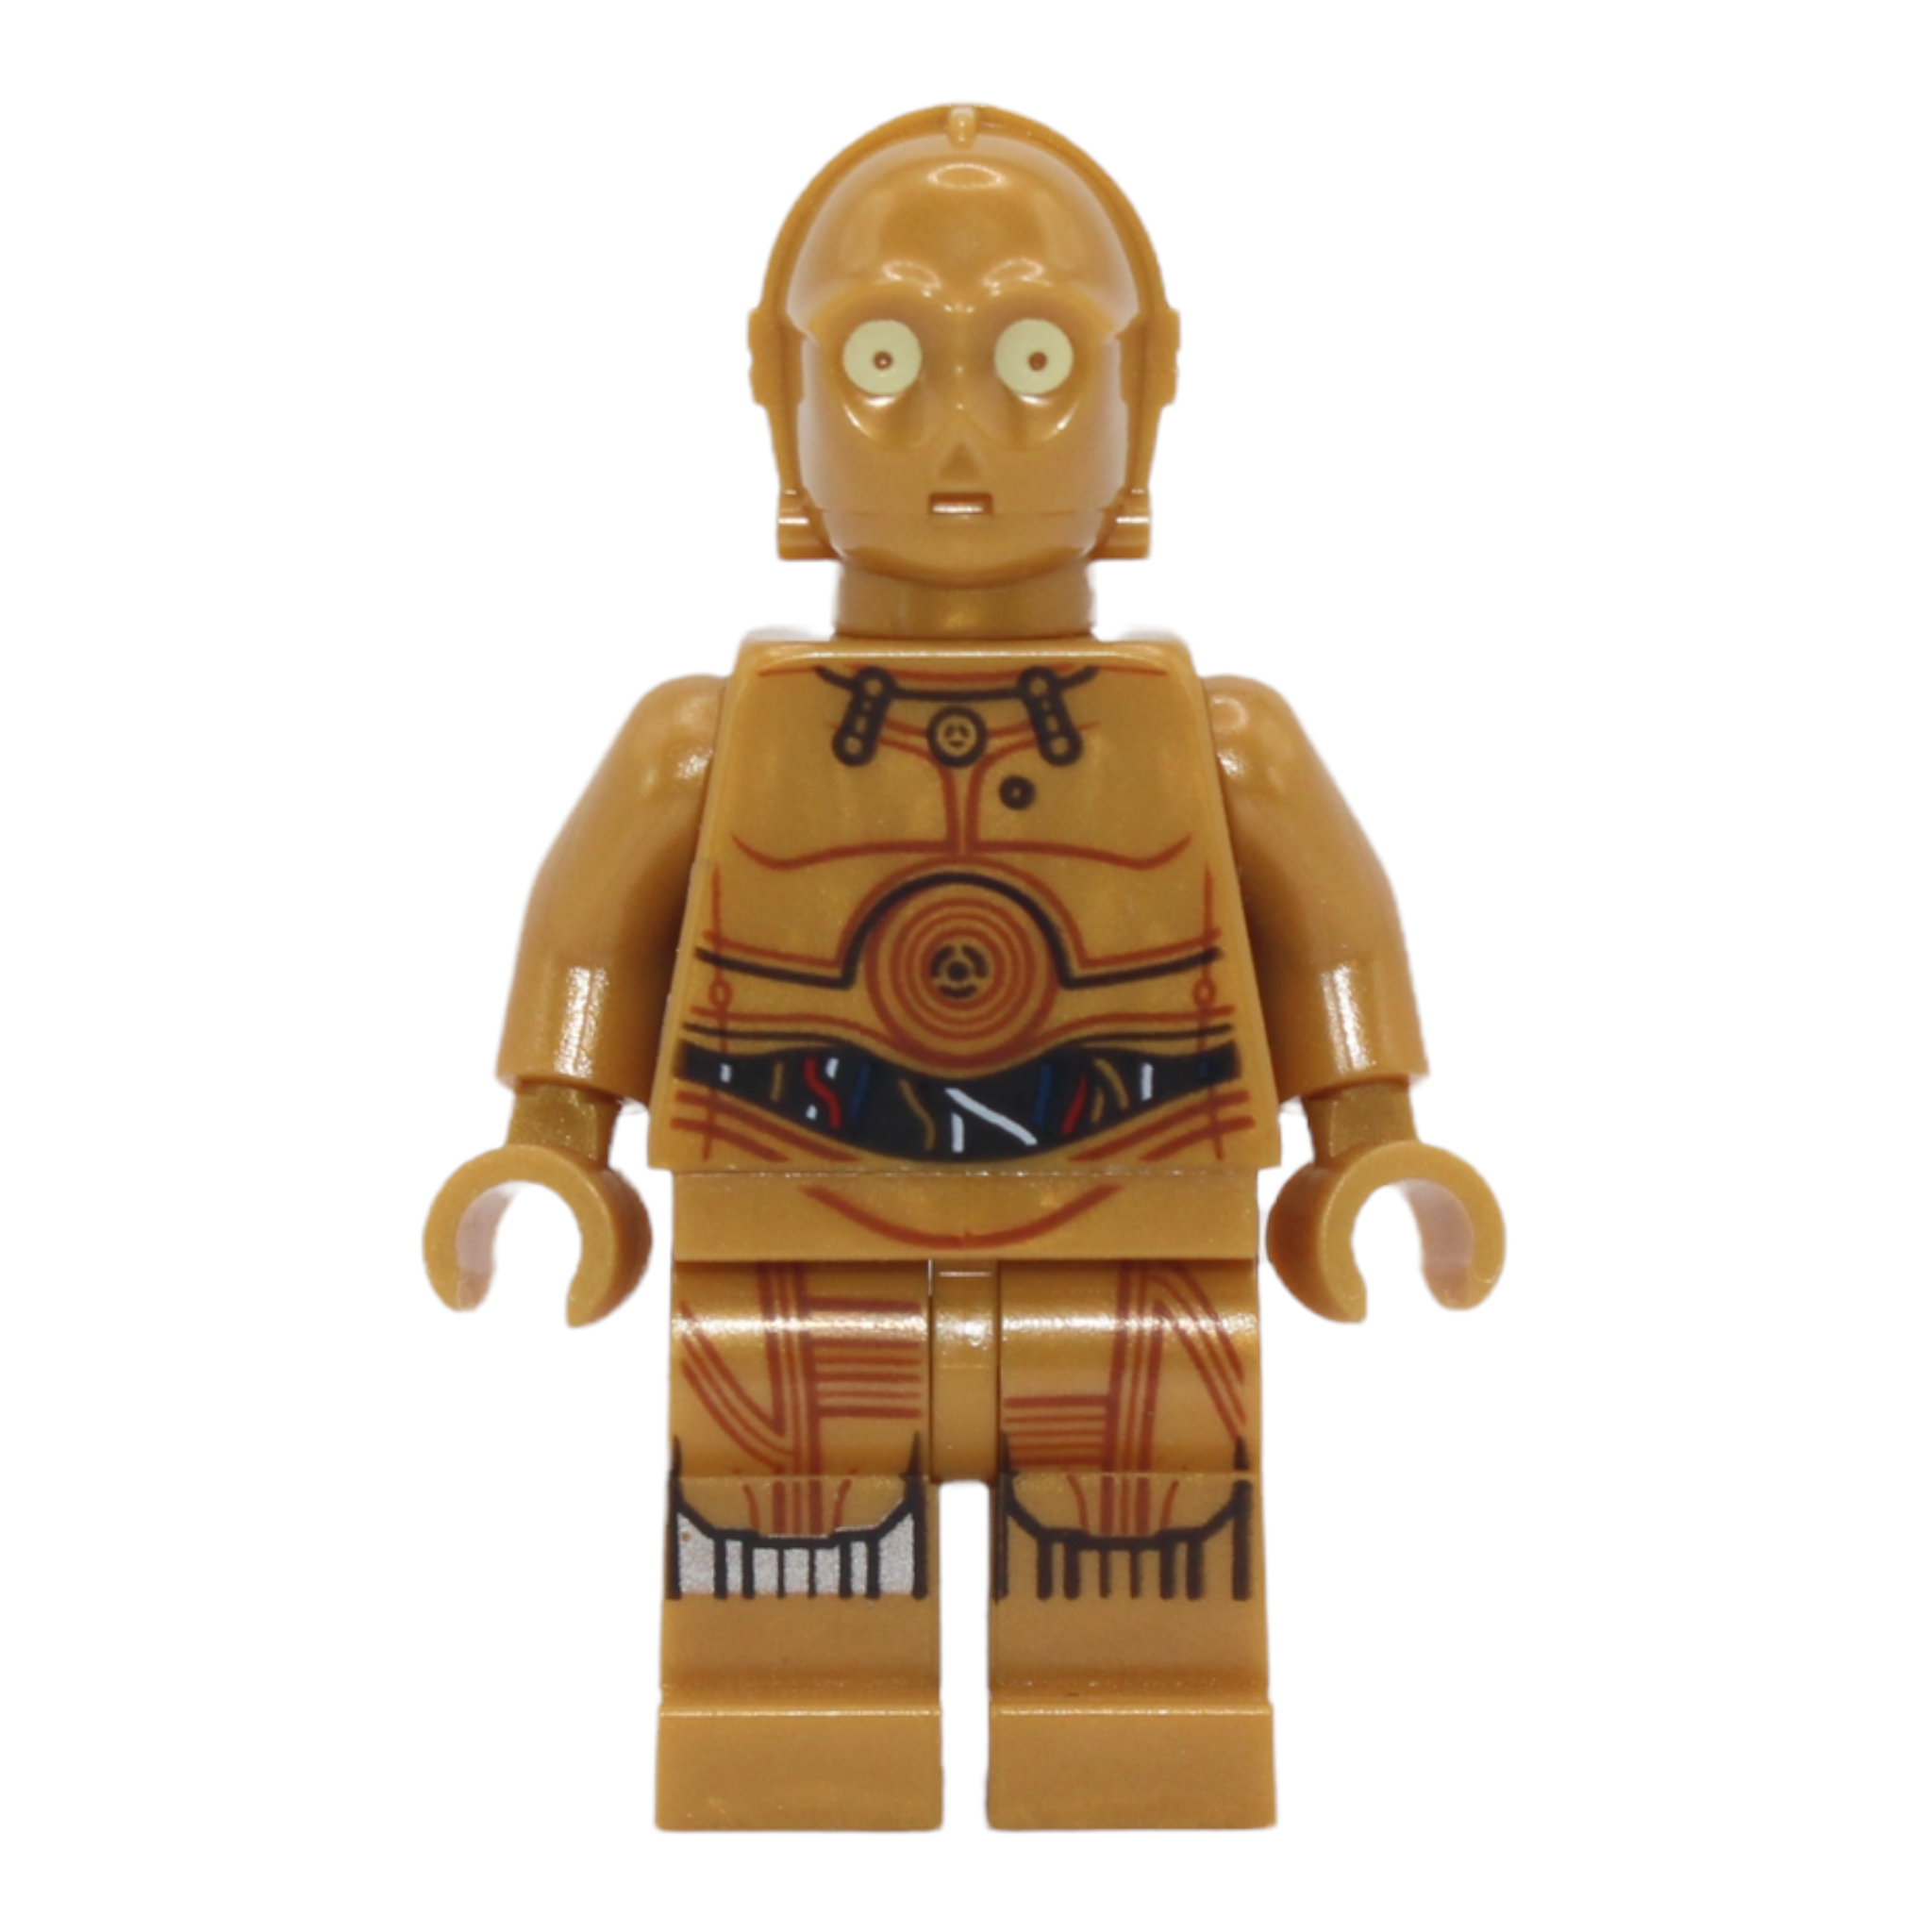 C-3PO (colorful wires, printed legs)